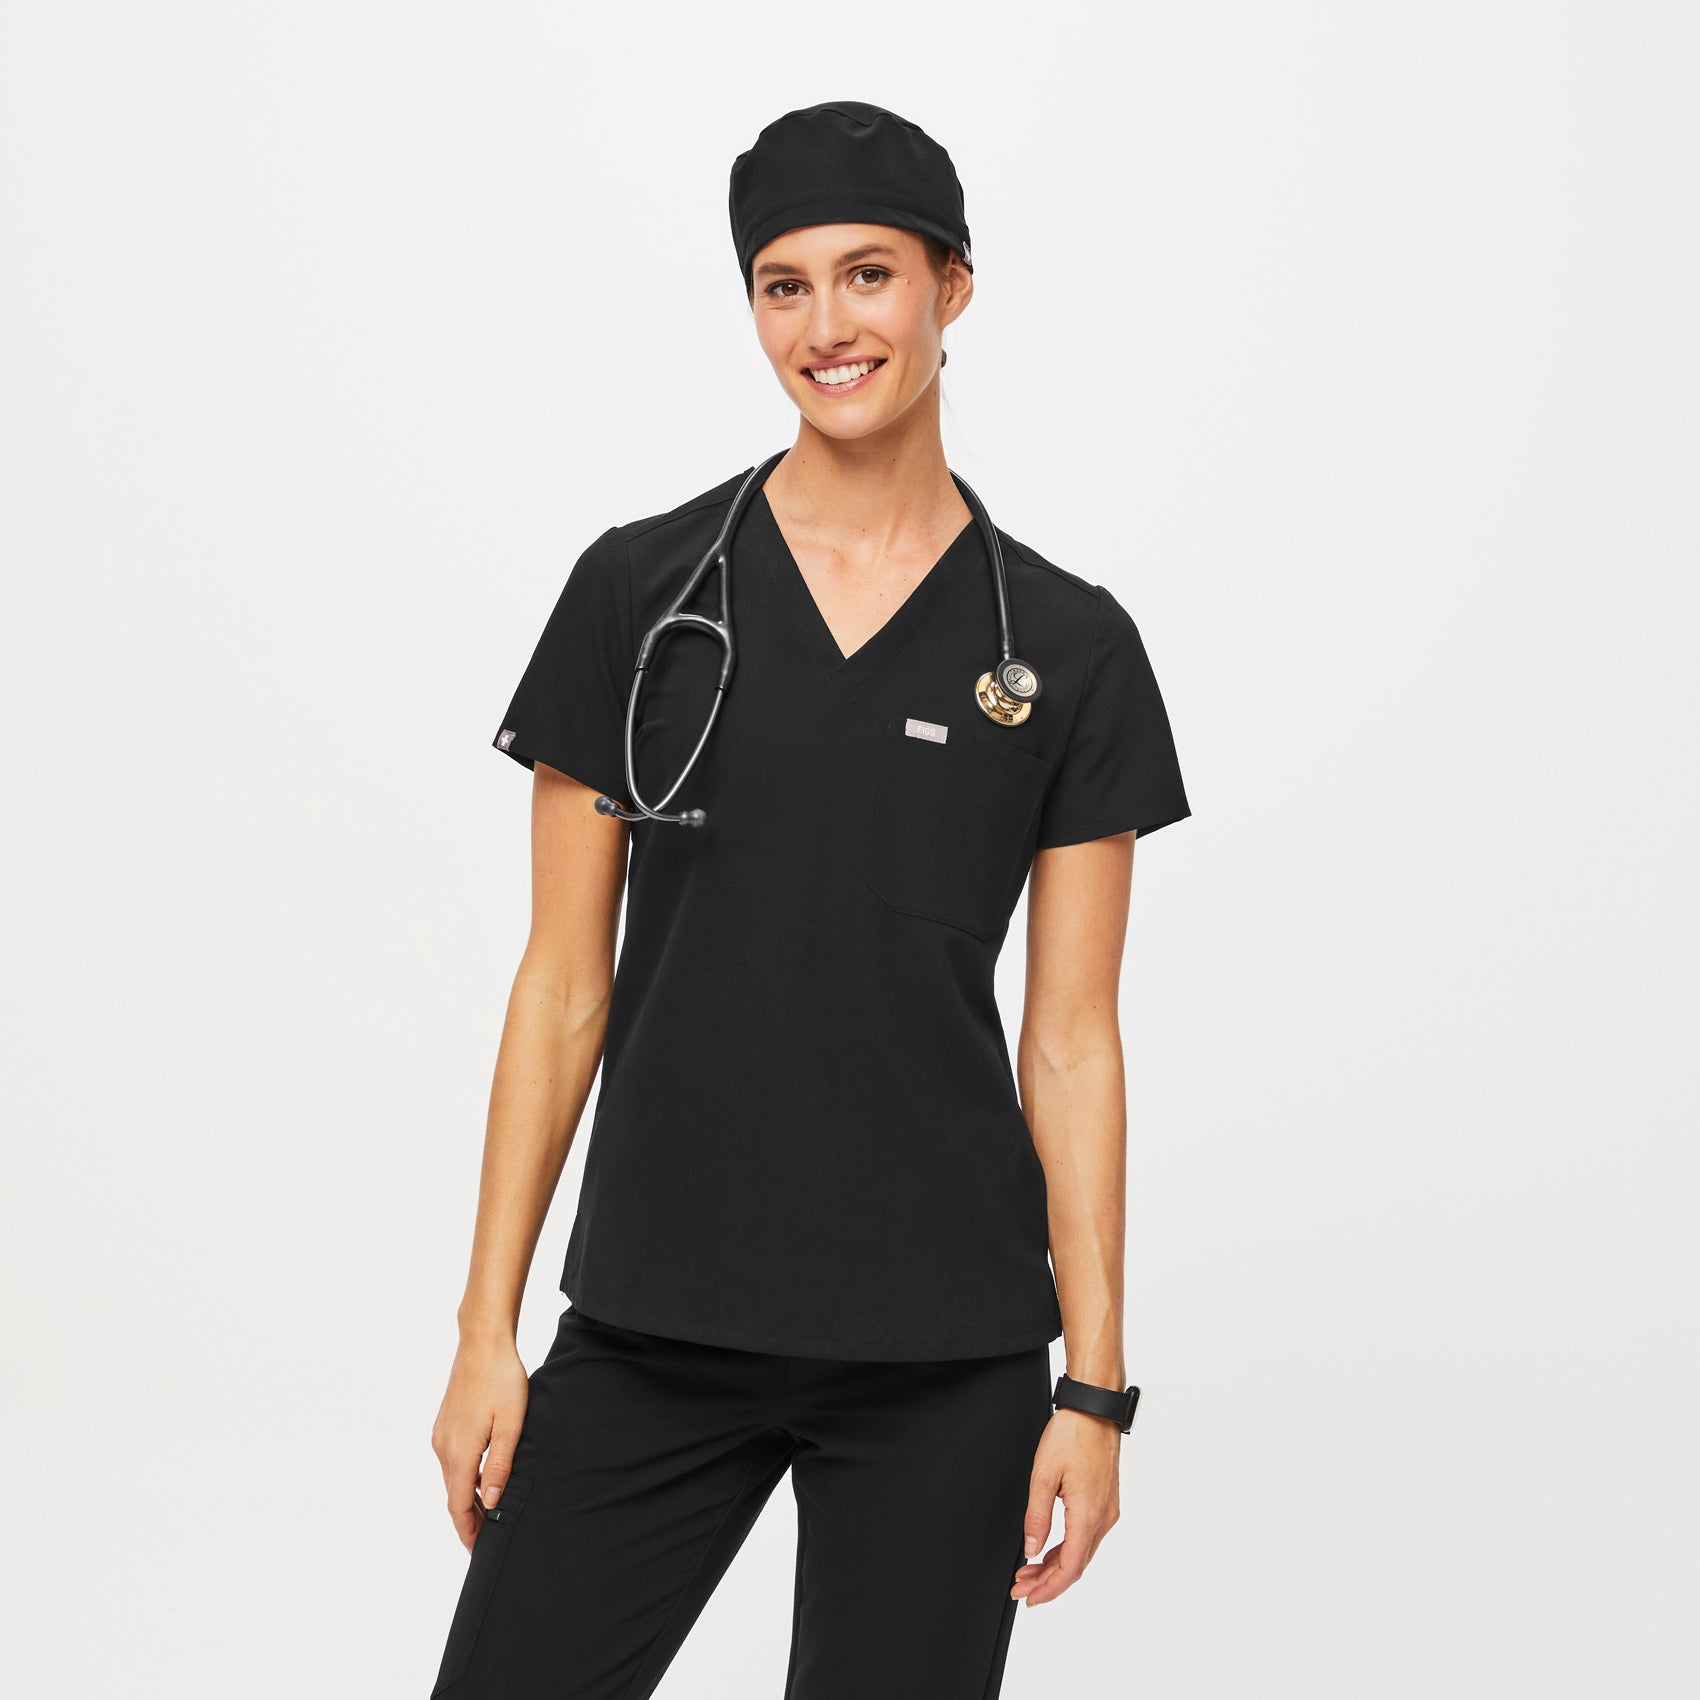 black Cotton Soft and gentle fabric Scrubs Caps for Women's and